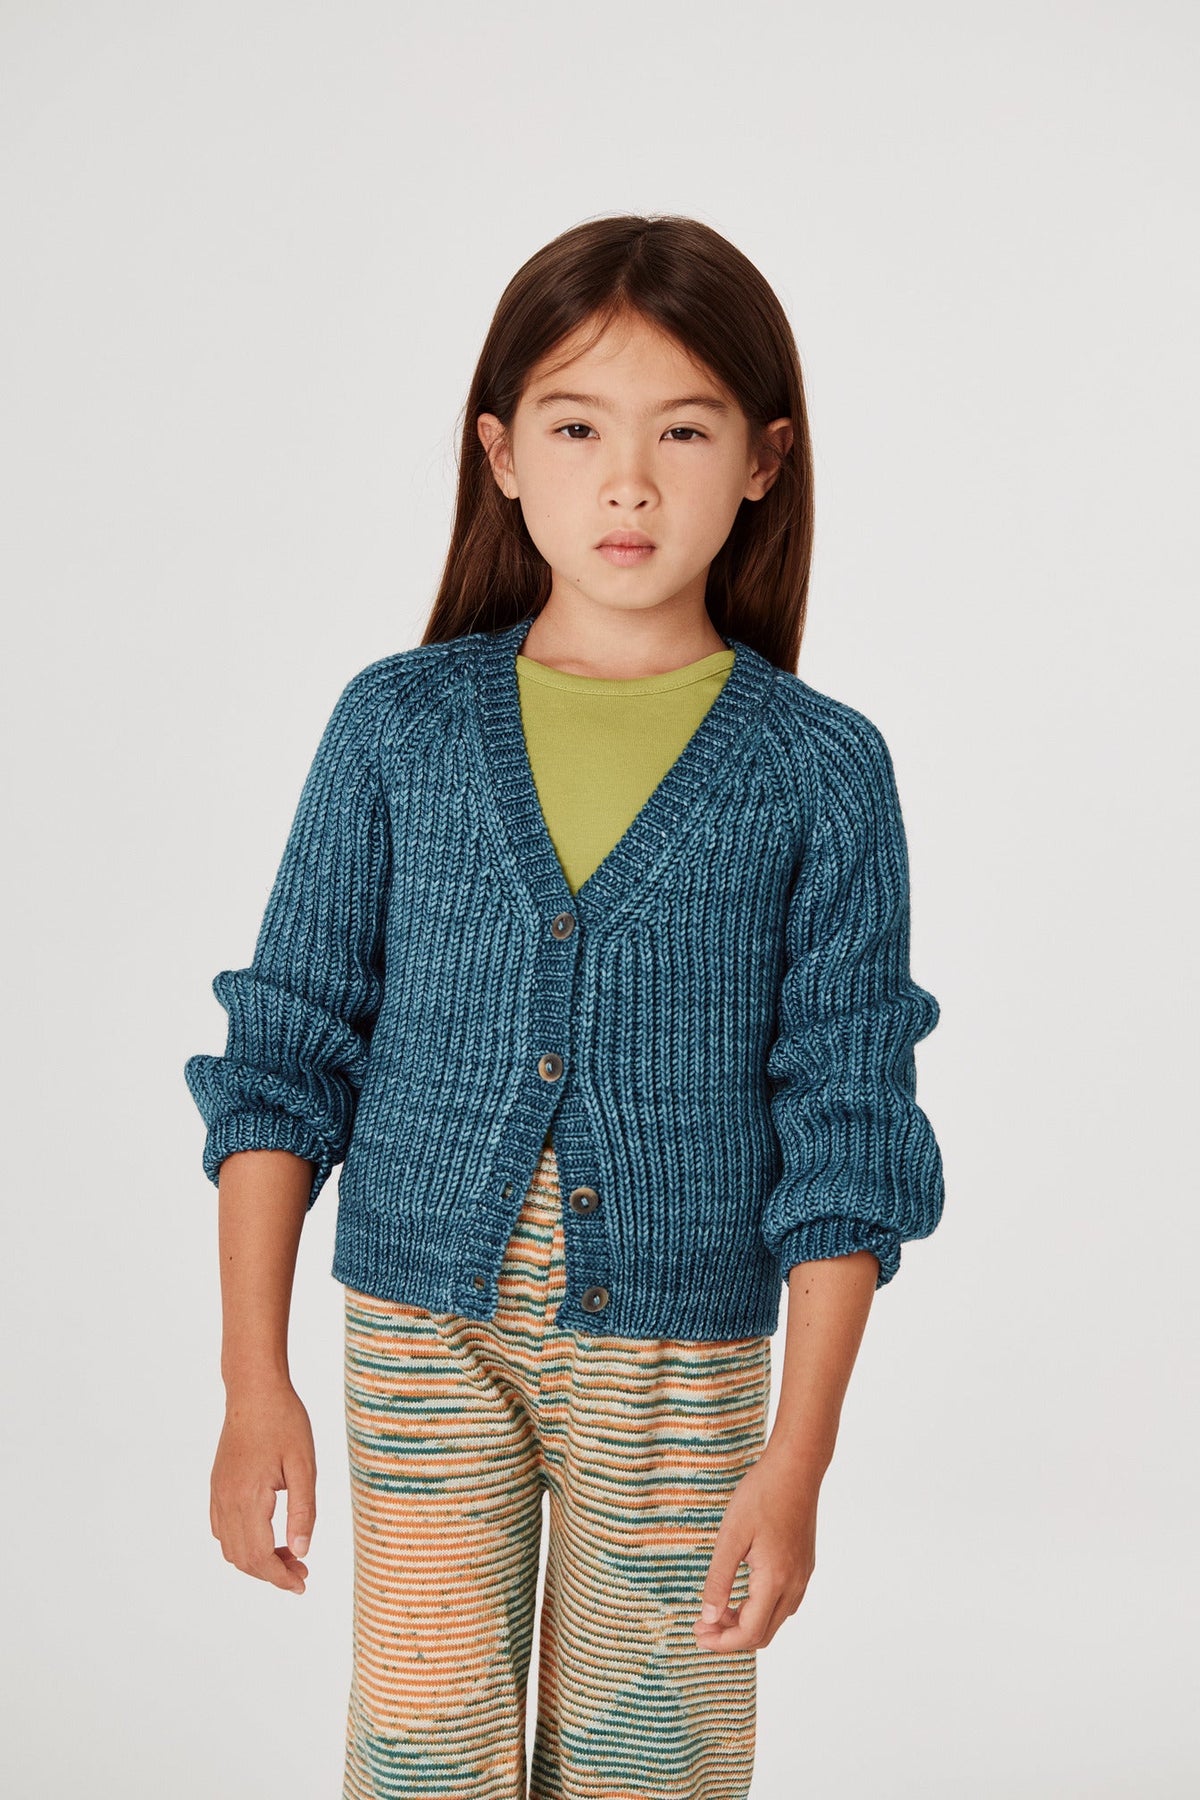 Fisherman Rib Everyday Cardigan - Dusk+Model is 48 inches tall, 47lbs, wearing a size 4-5y